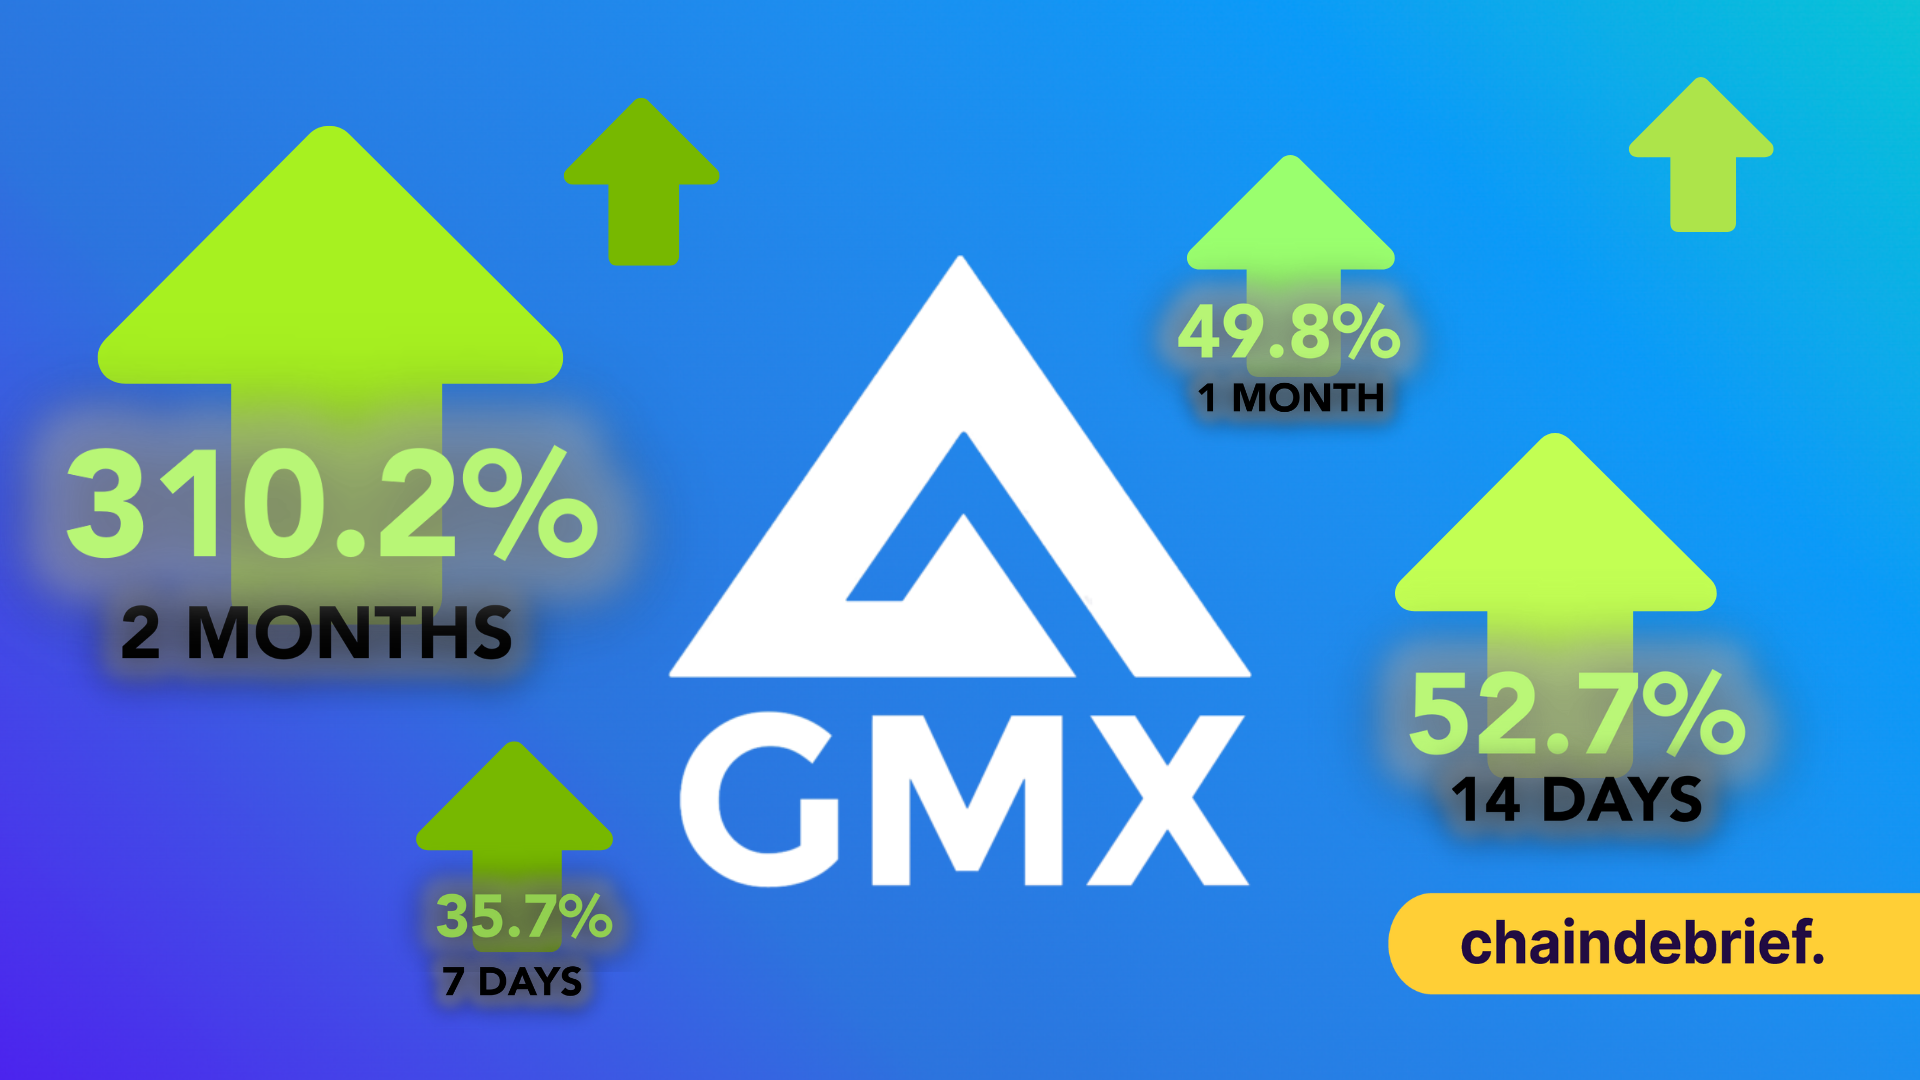 GMX Is Up 52.7% In The Last 14 Days; What Is All The Hype About?